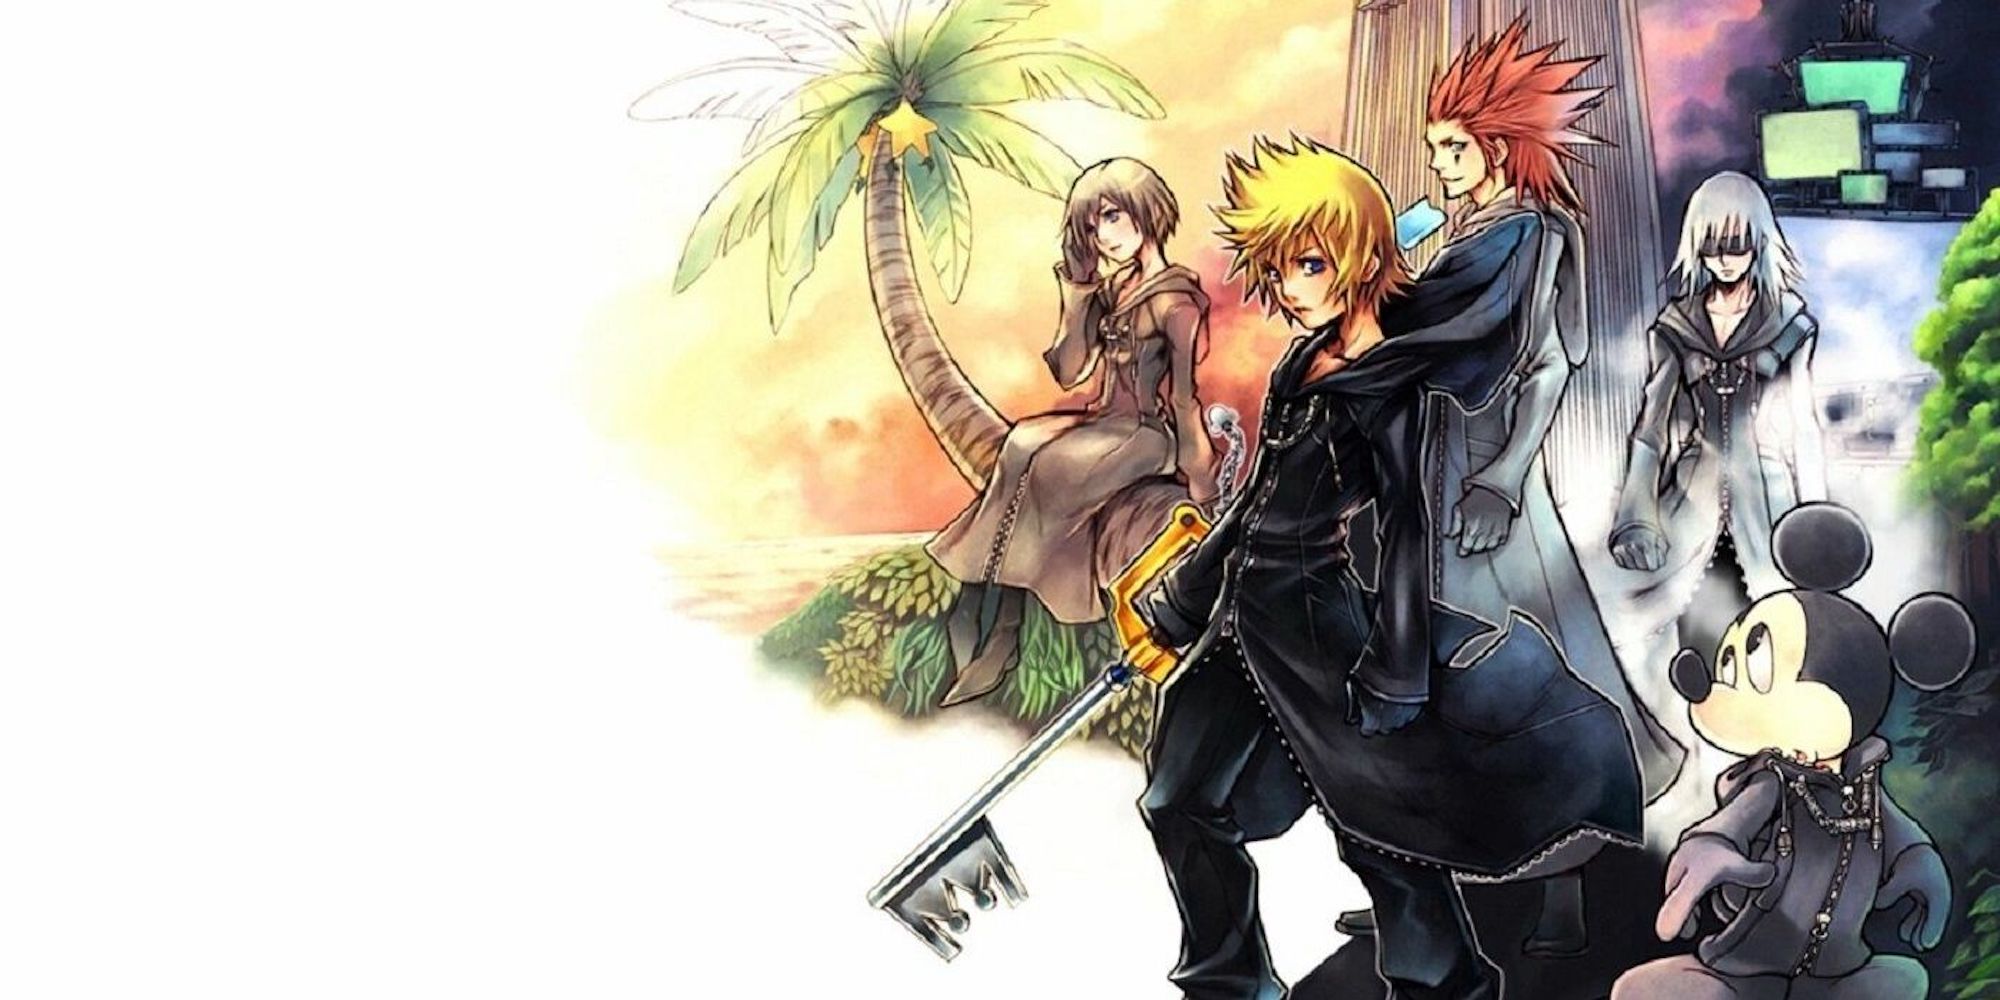 Promo art featuring characters in Kingdom Hearts 358:2 Days